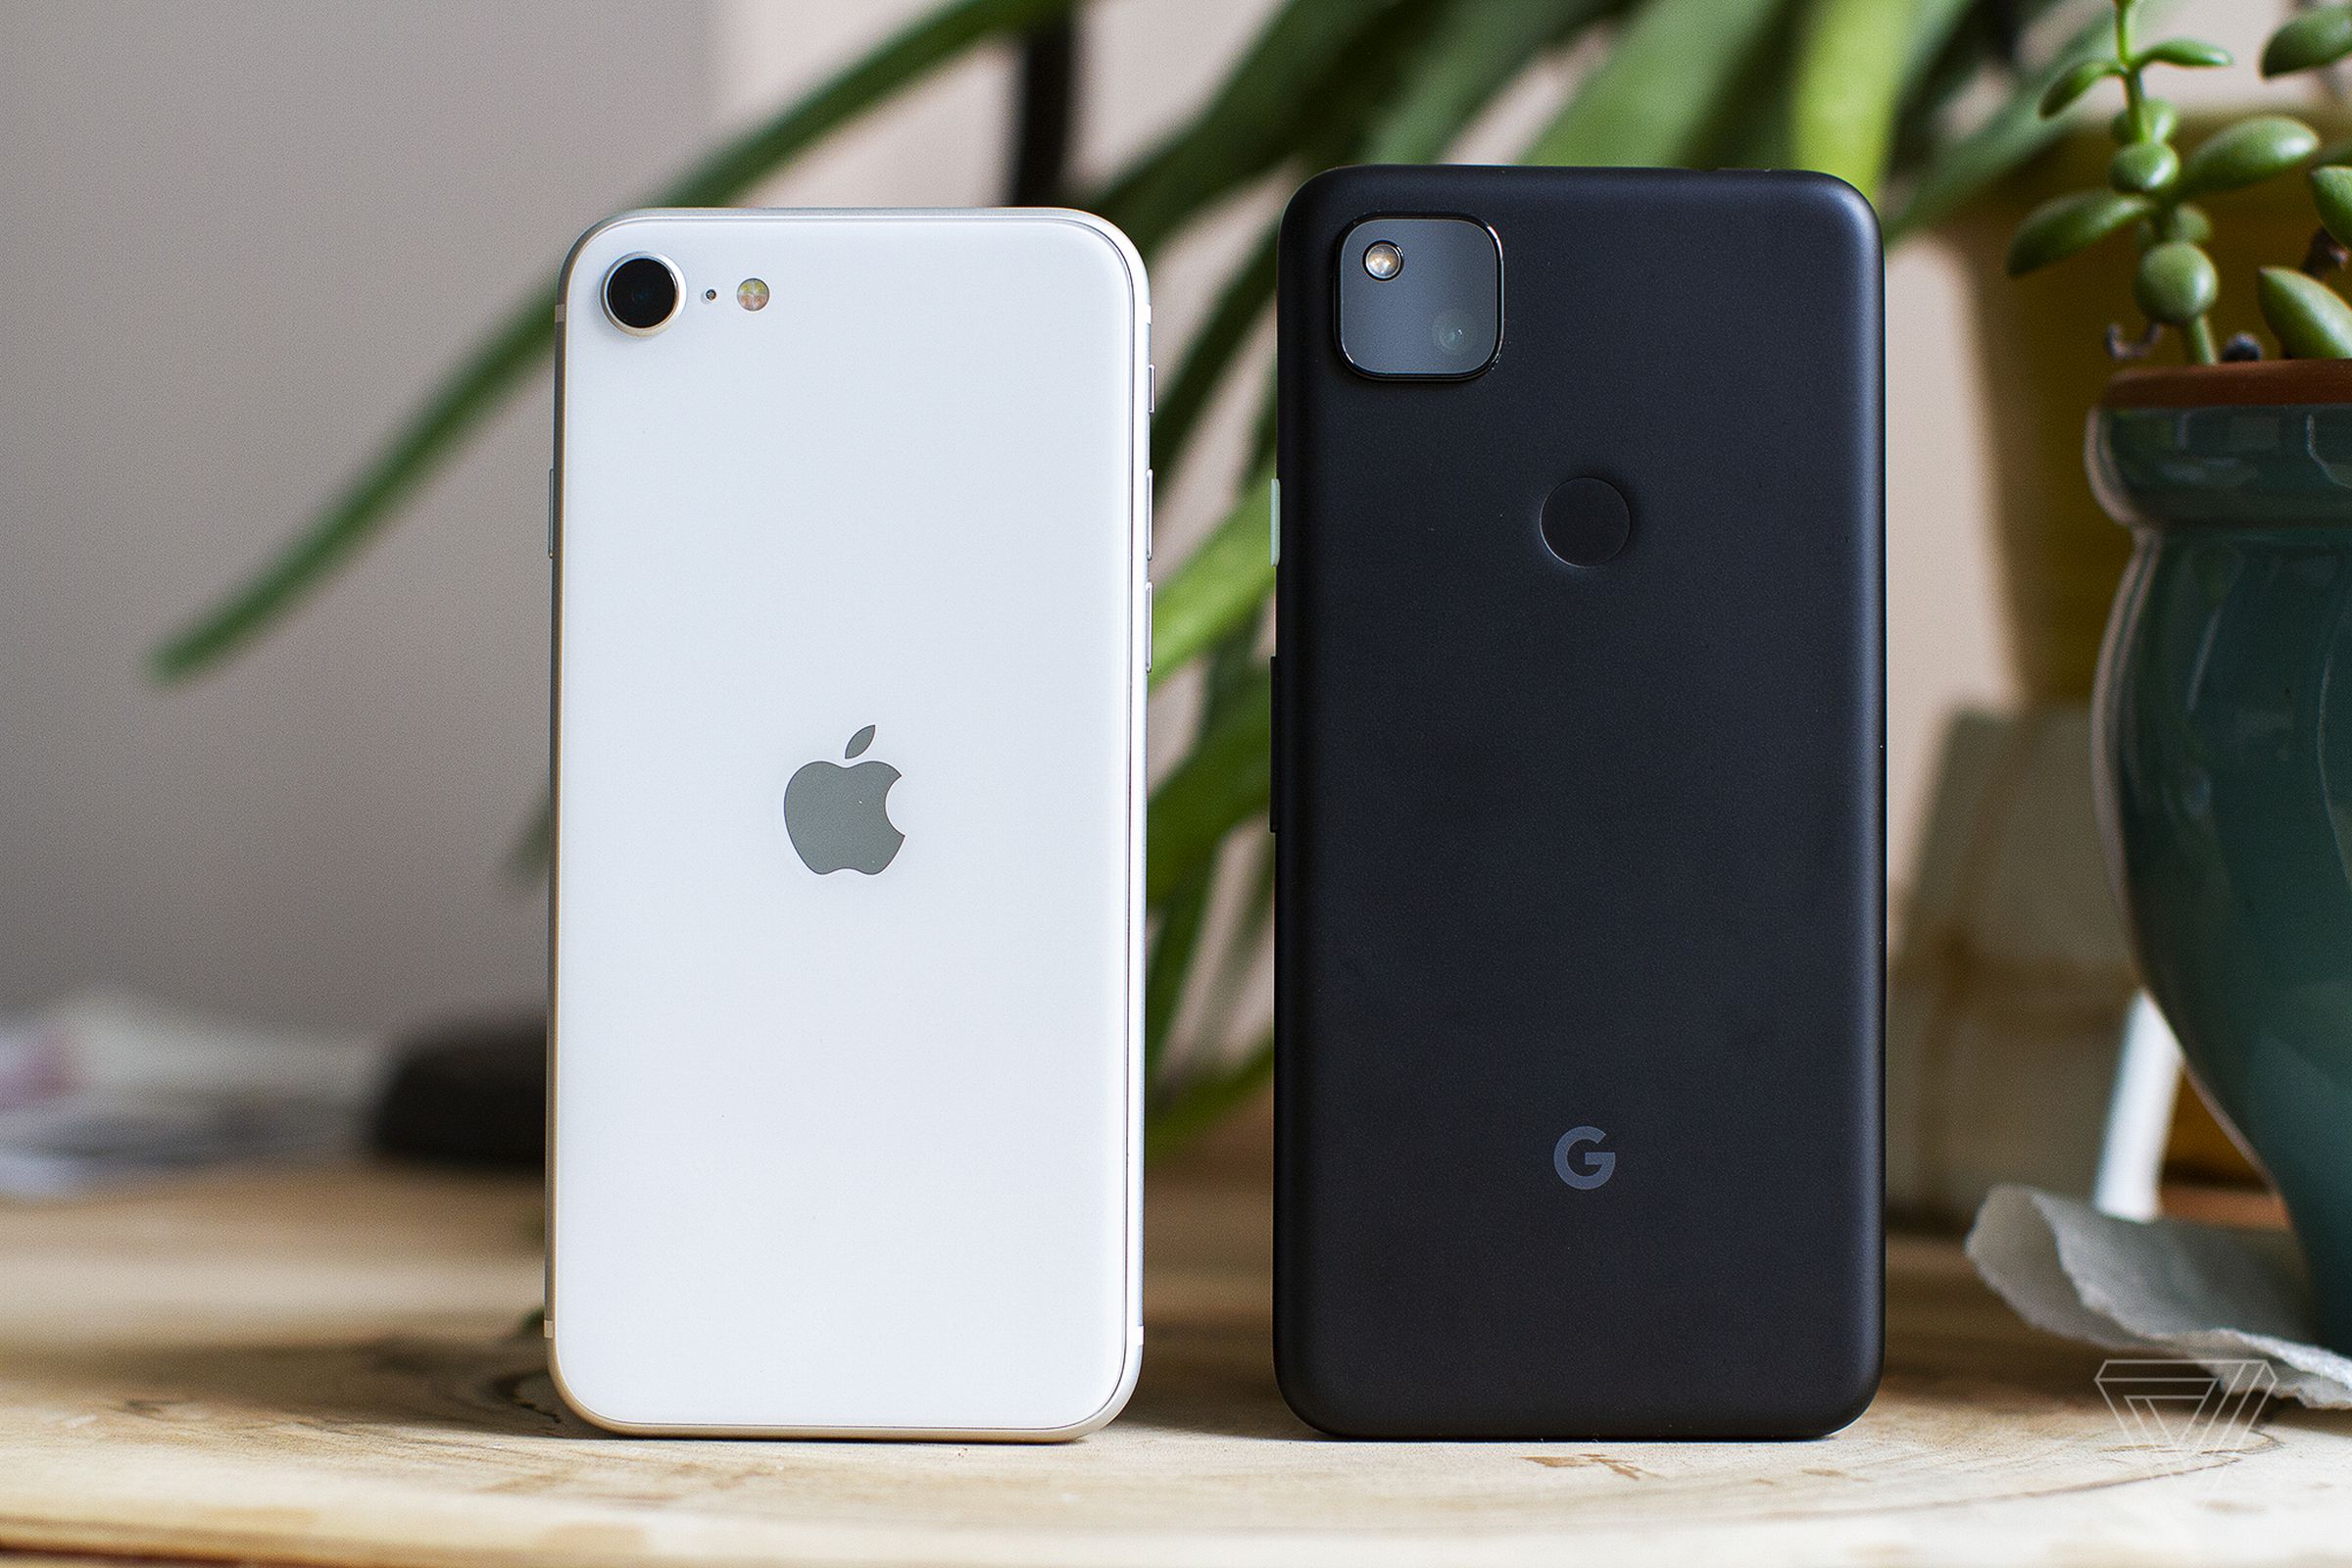 Apple’s iPhone SE and the Google Pixel 4A